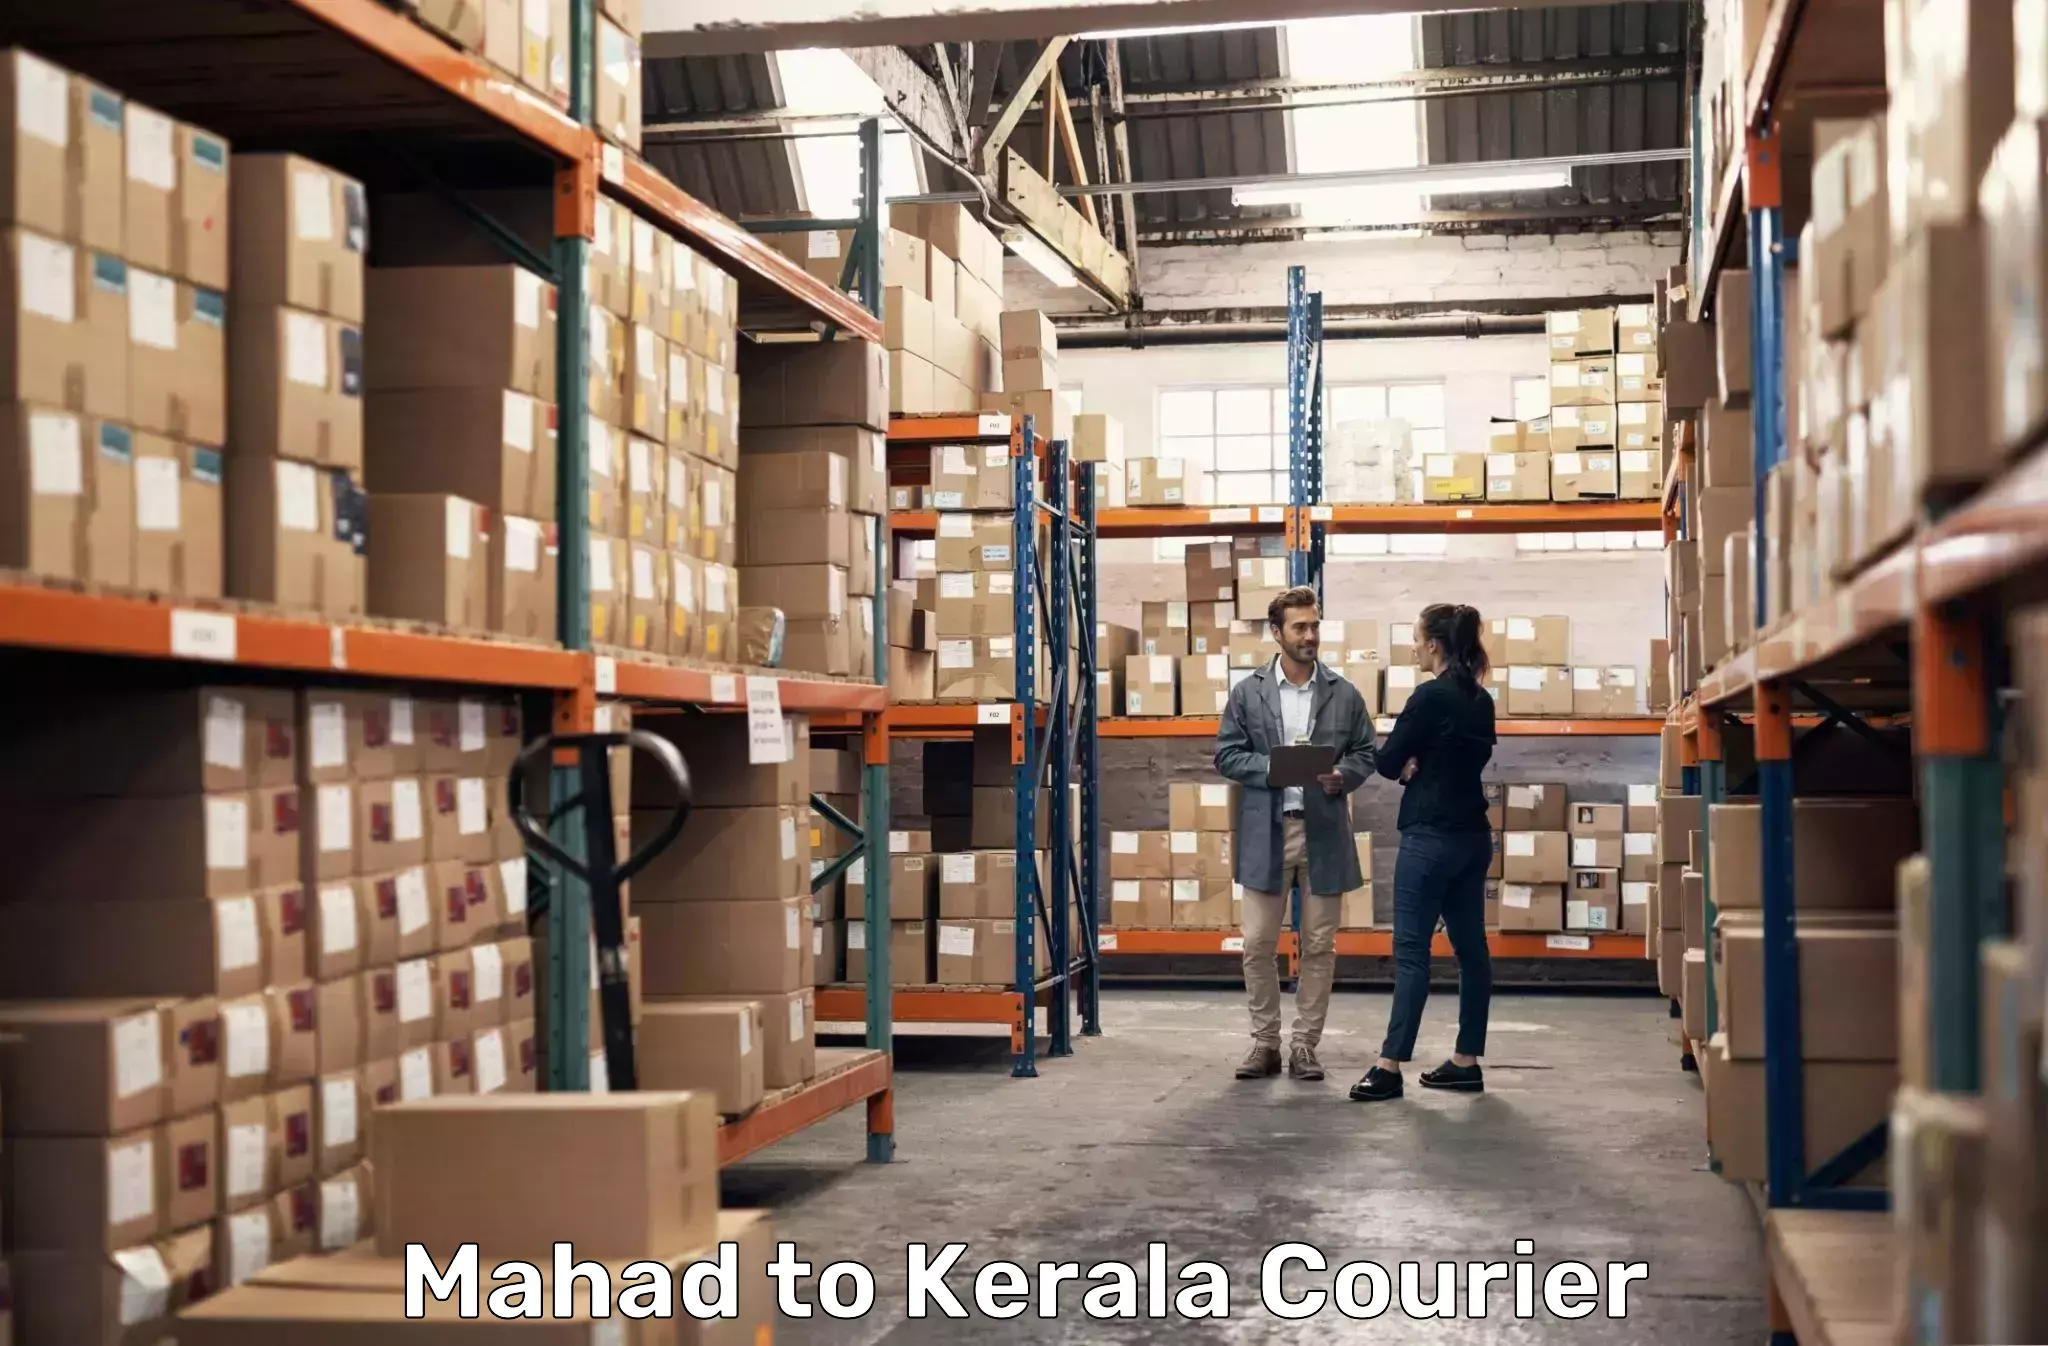 Fast delivery service Mahad to Kerala